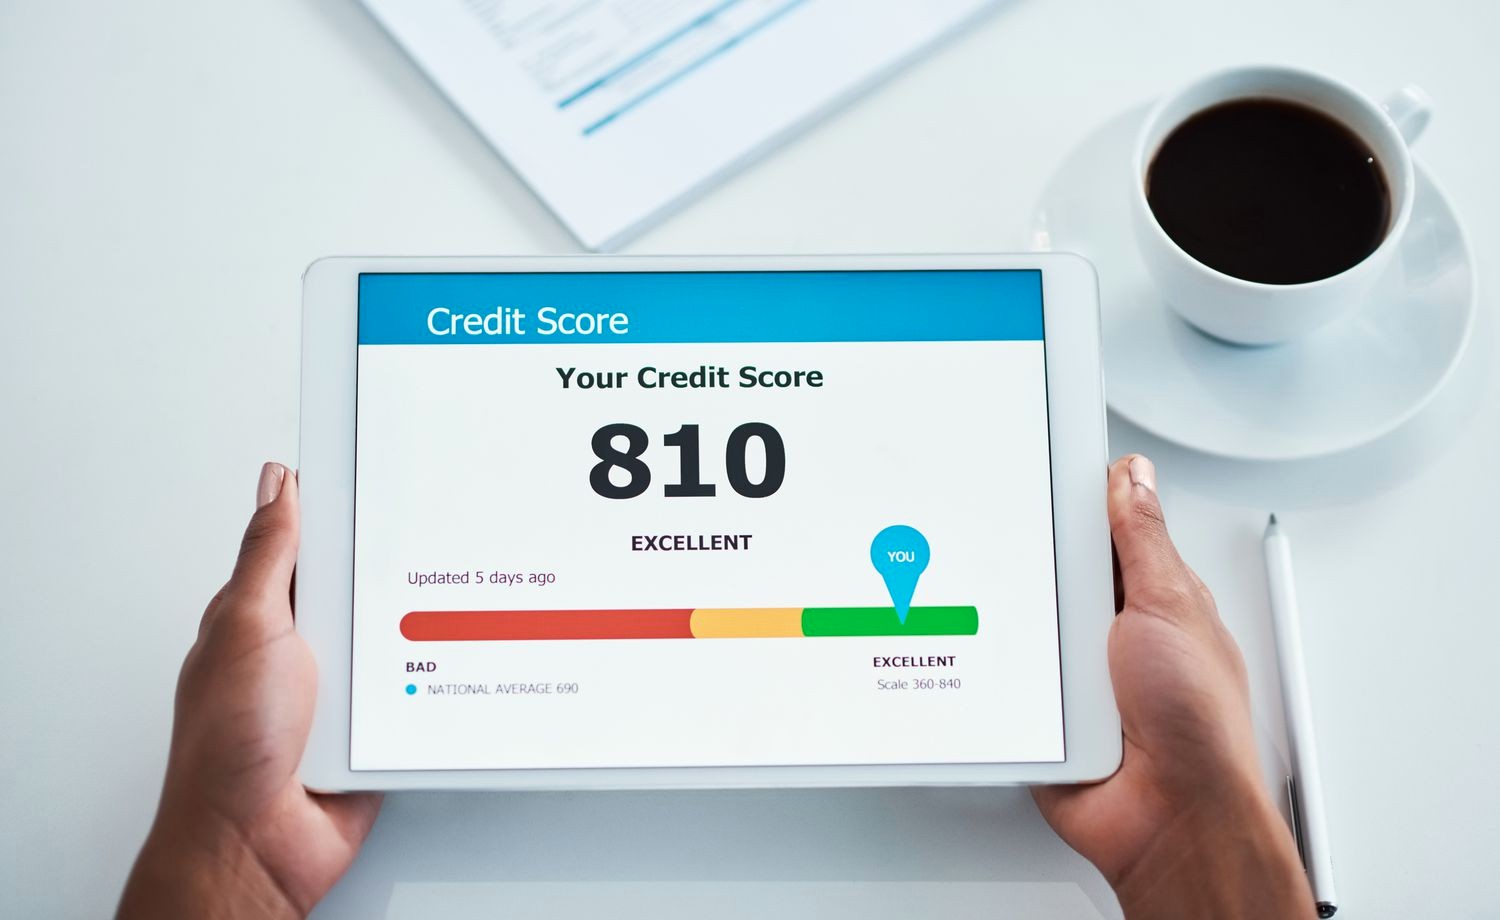 What is the Highest Credit Score?